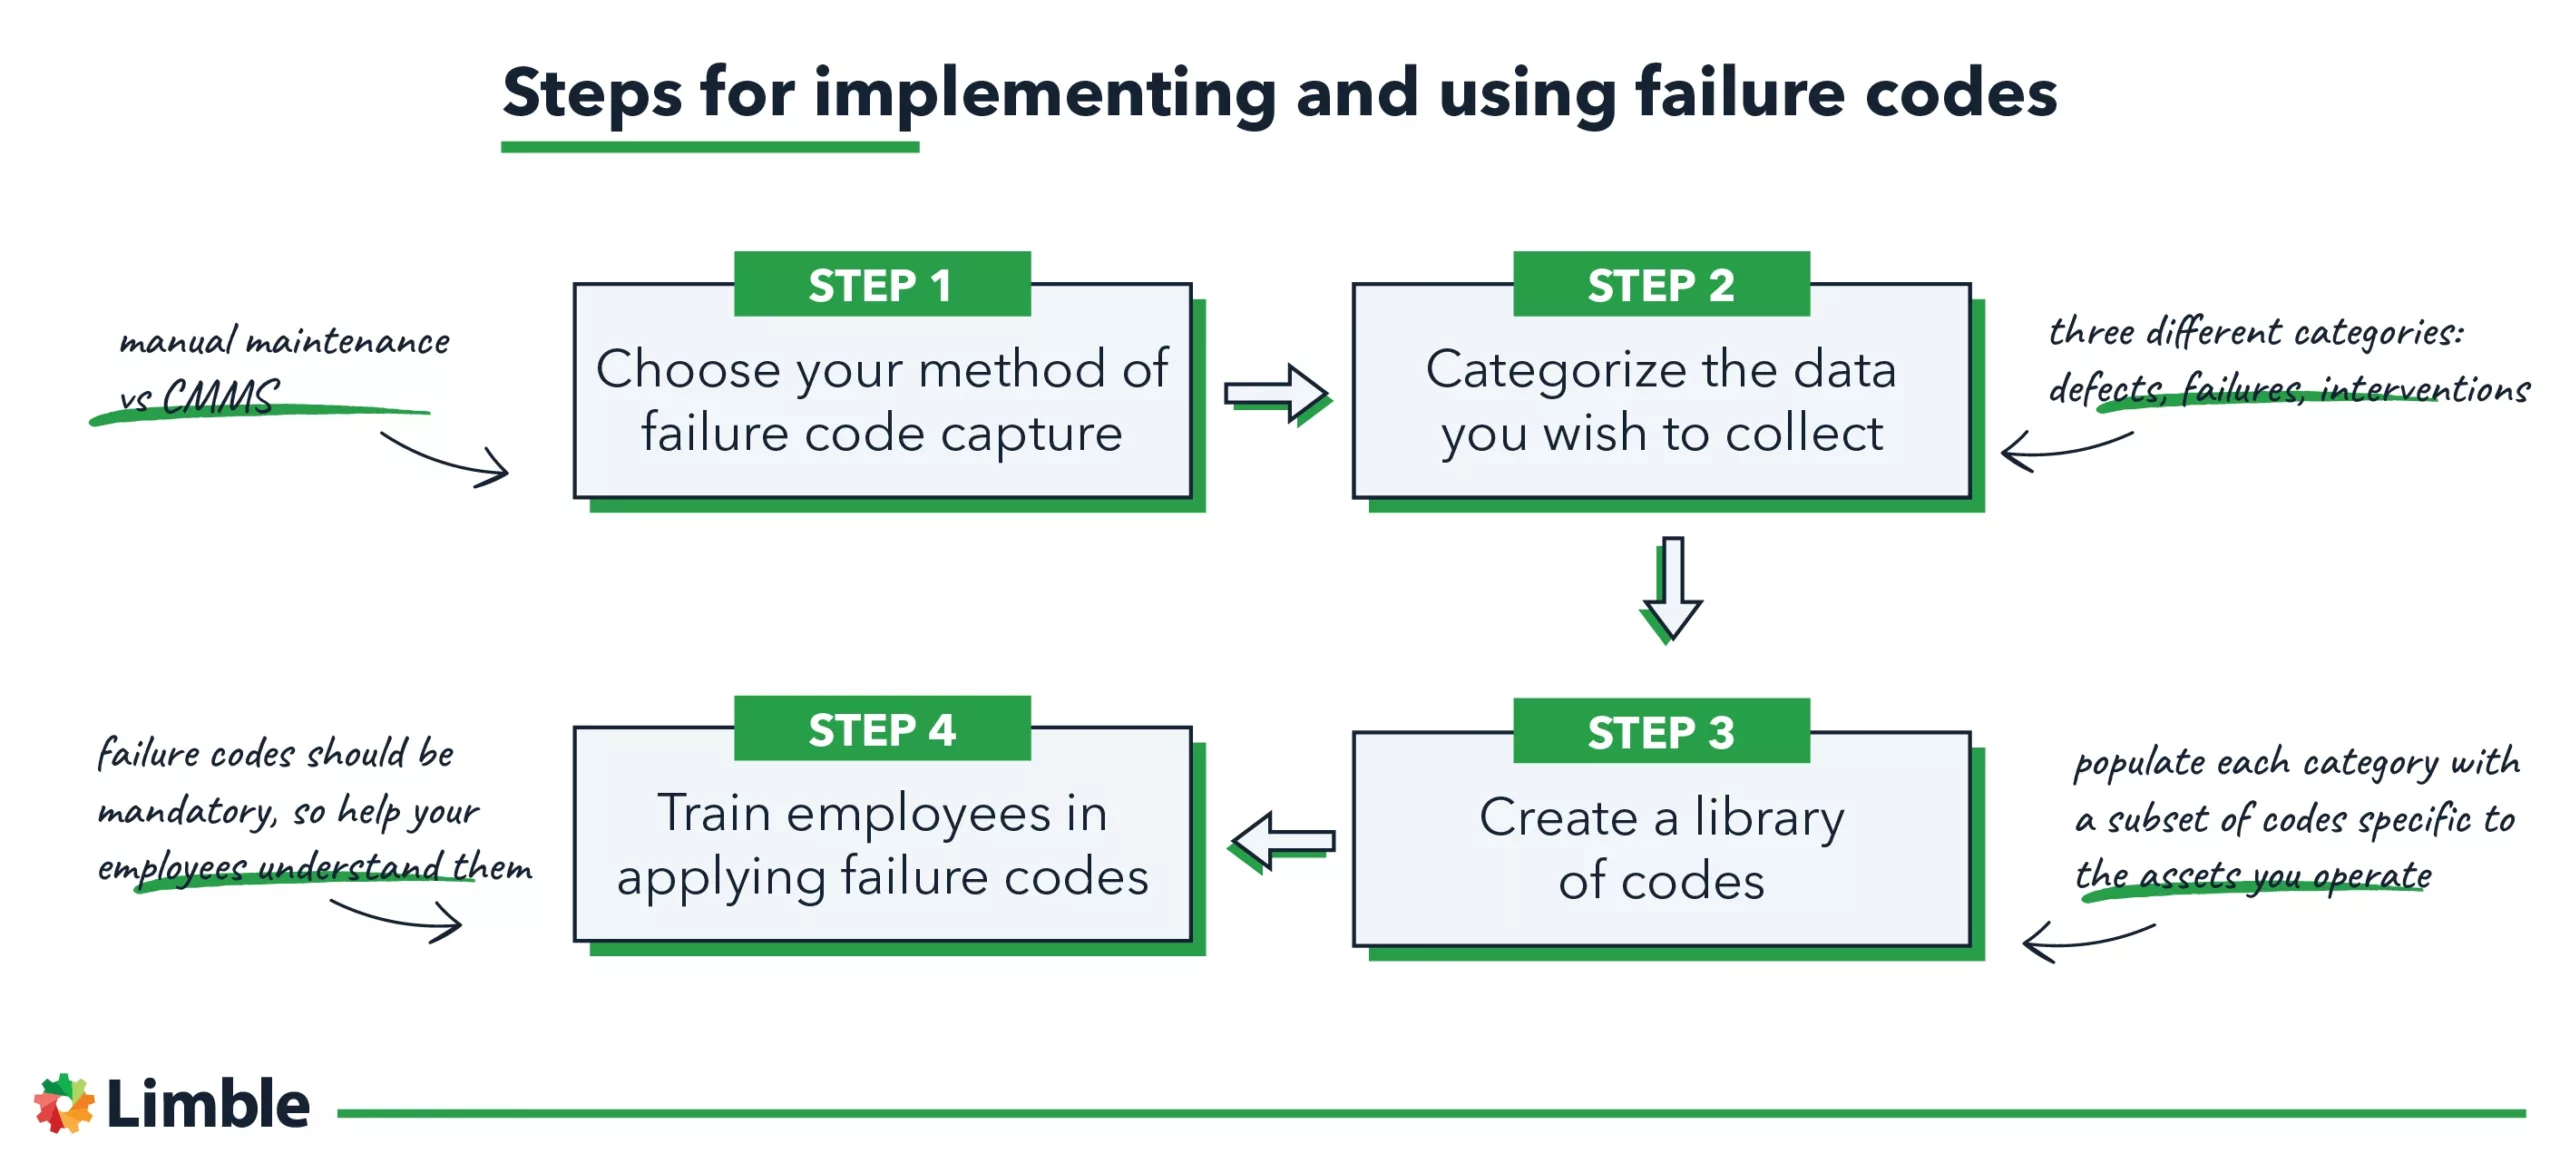 Steps for implementing and using failure codes.